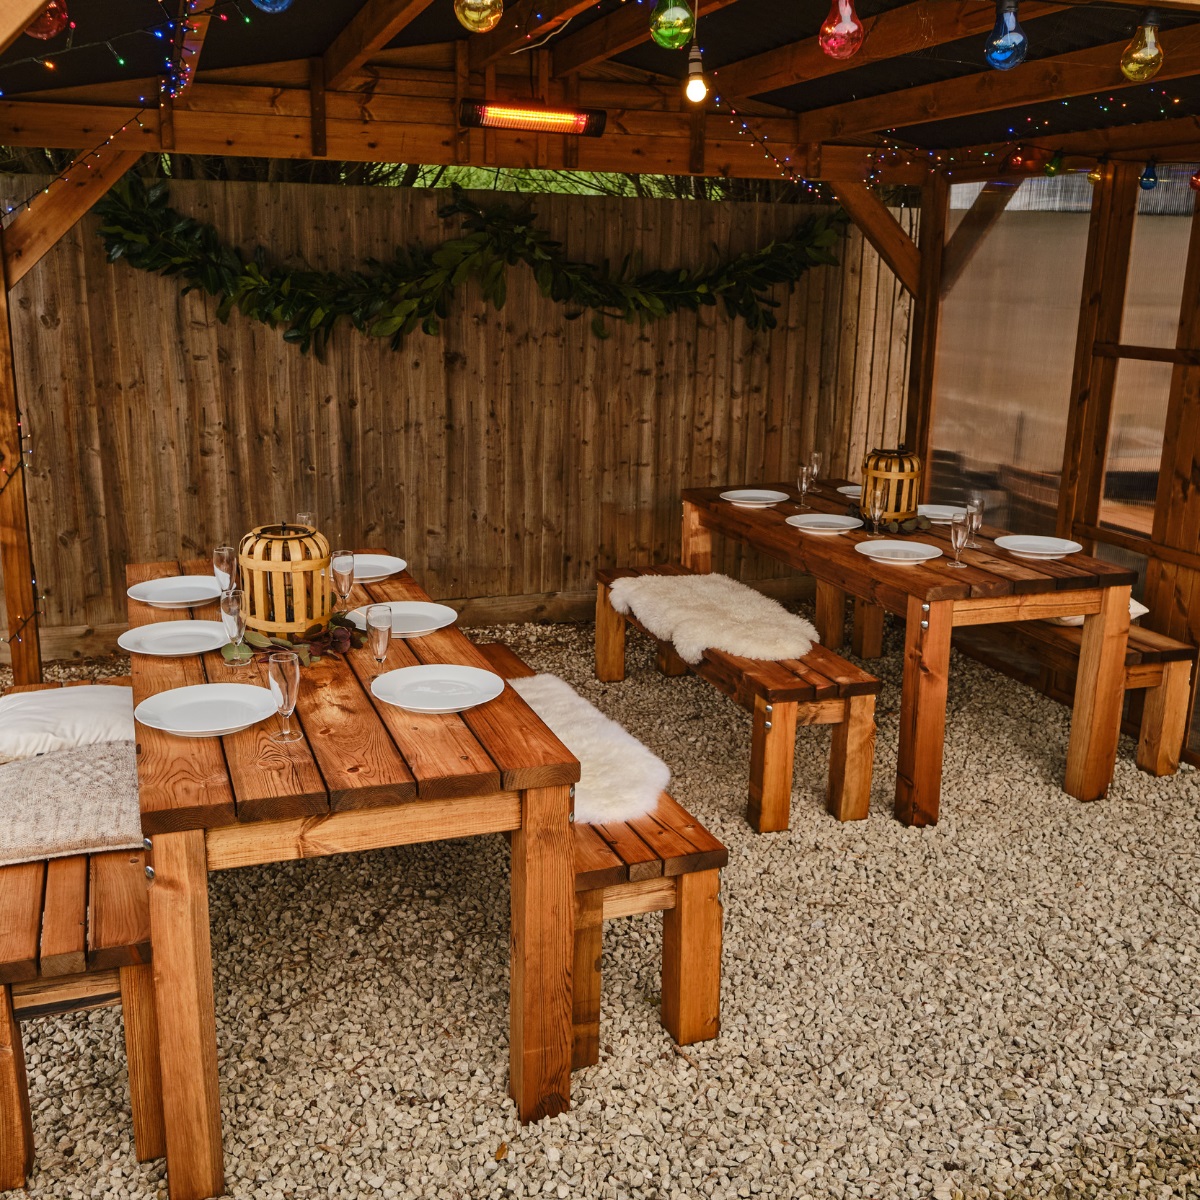 Two wooden rectangular outdoor tables with 2 bench seats either side with tables set for dinner underneath a wooden gazebo on a gravel patio